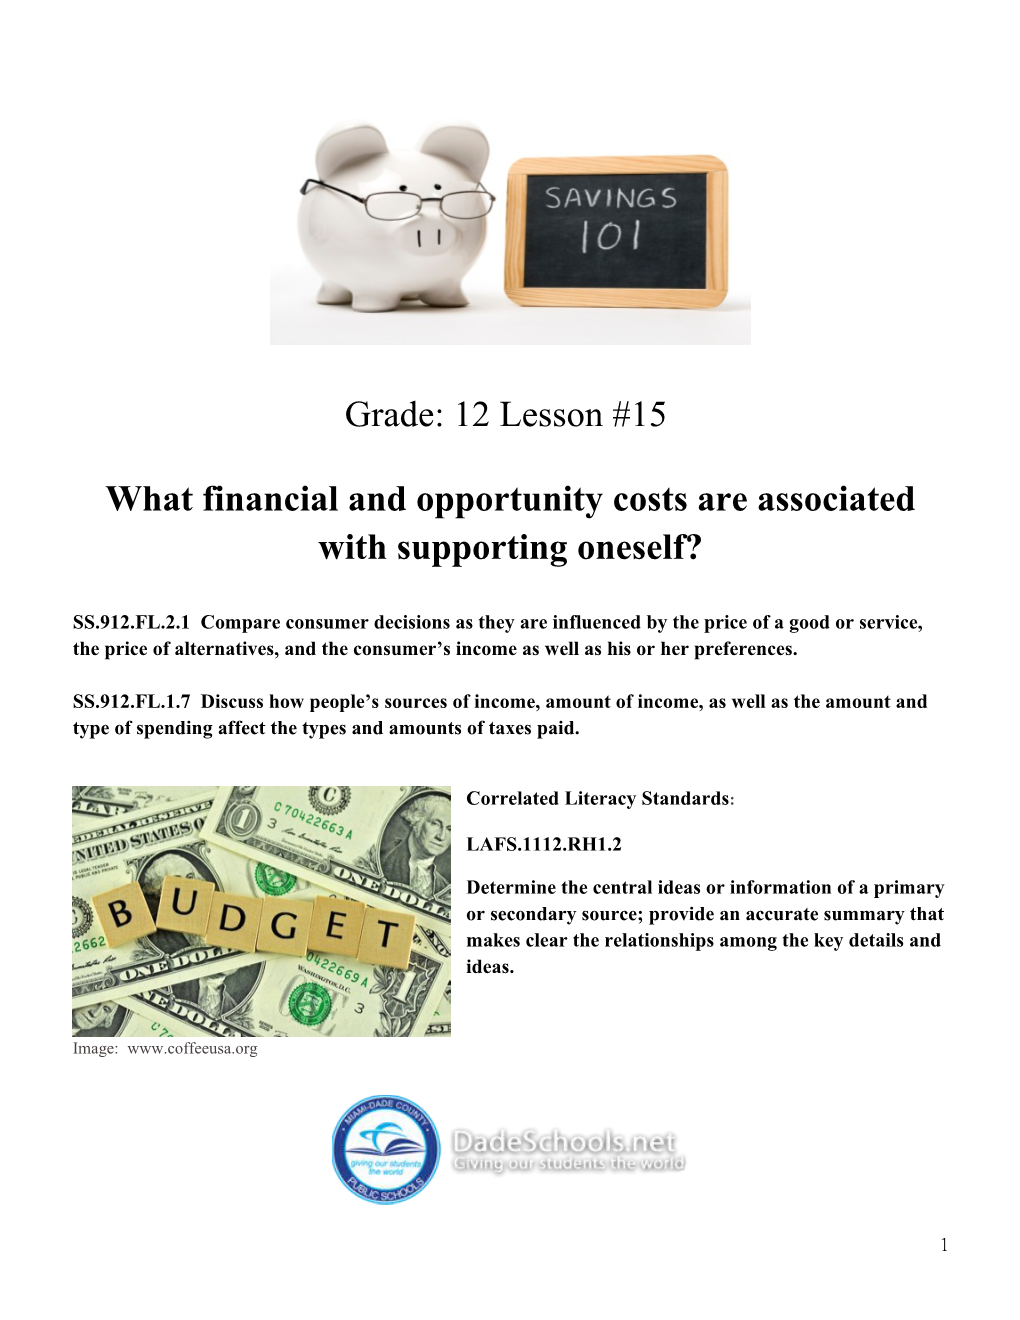 What Financial and Opportunity Costs Are Associated with Supporting Oneself?